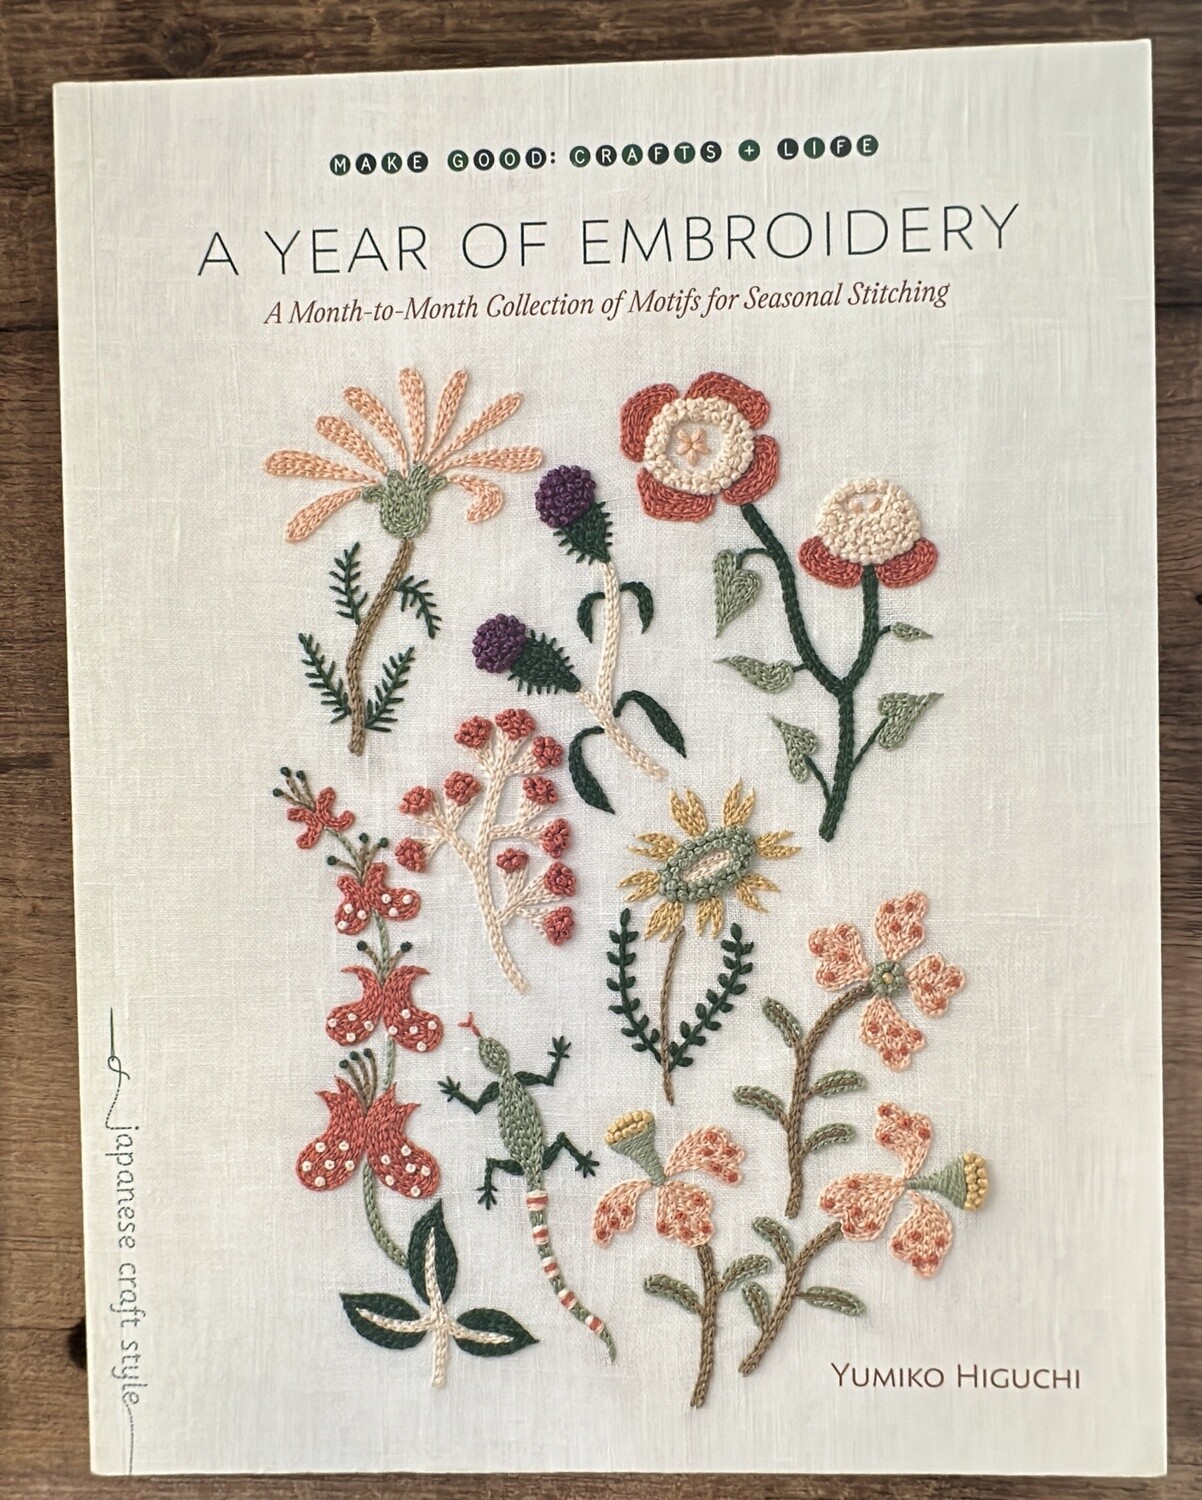 A Year of Embroidery